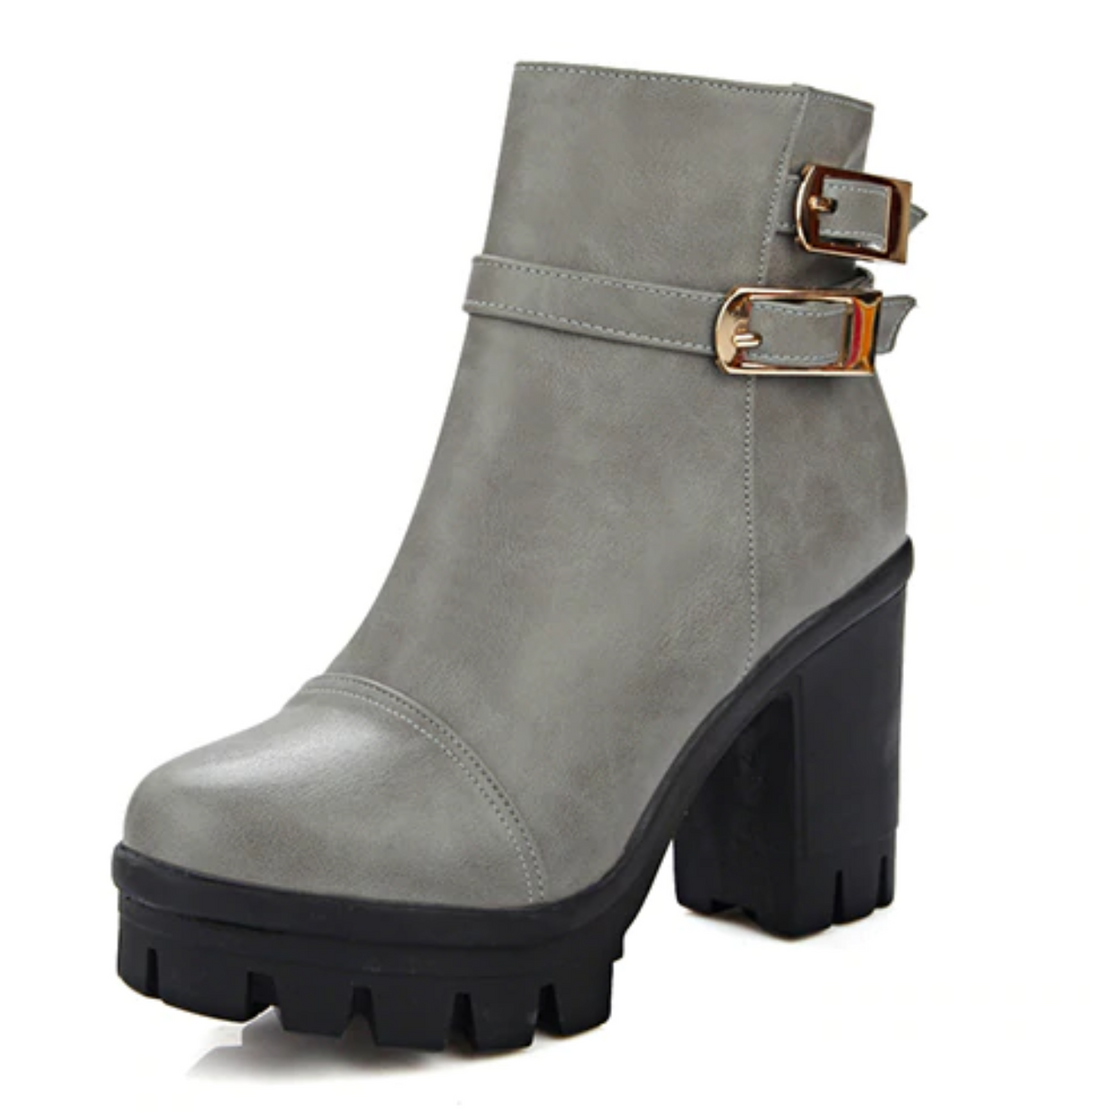 Women's Autumn Casual High Heels Ankle Boots